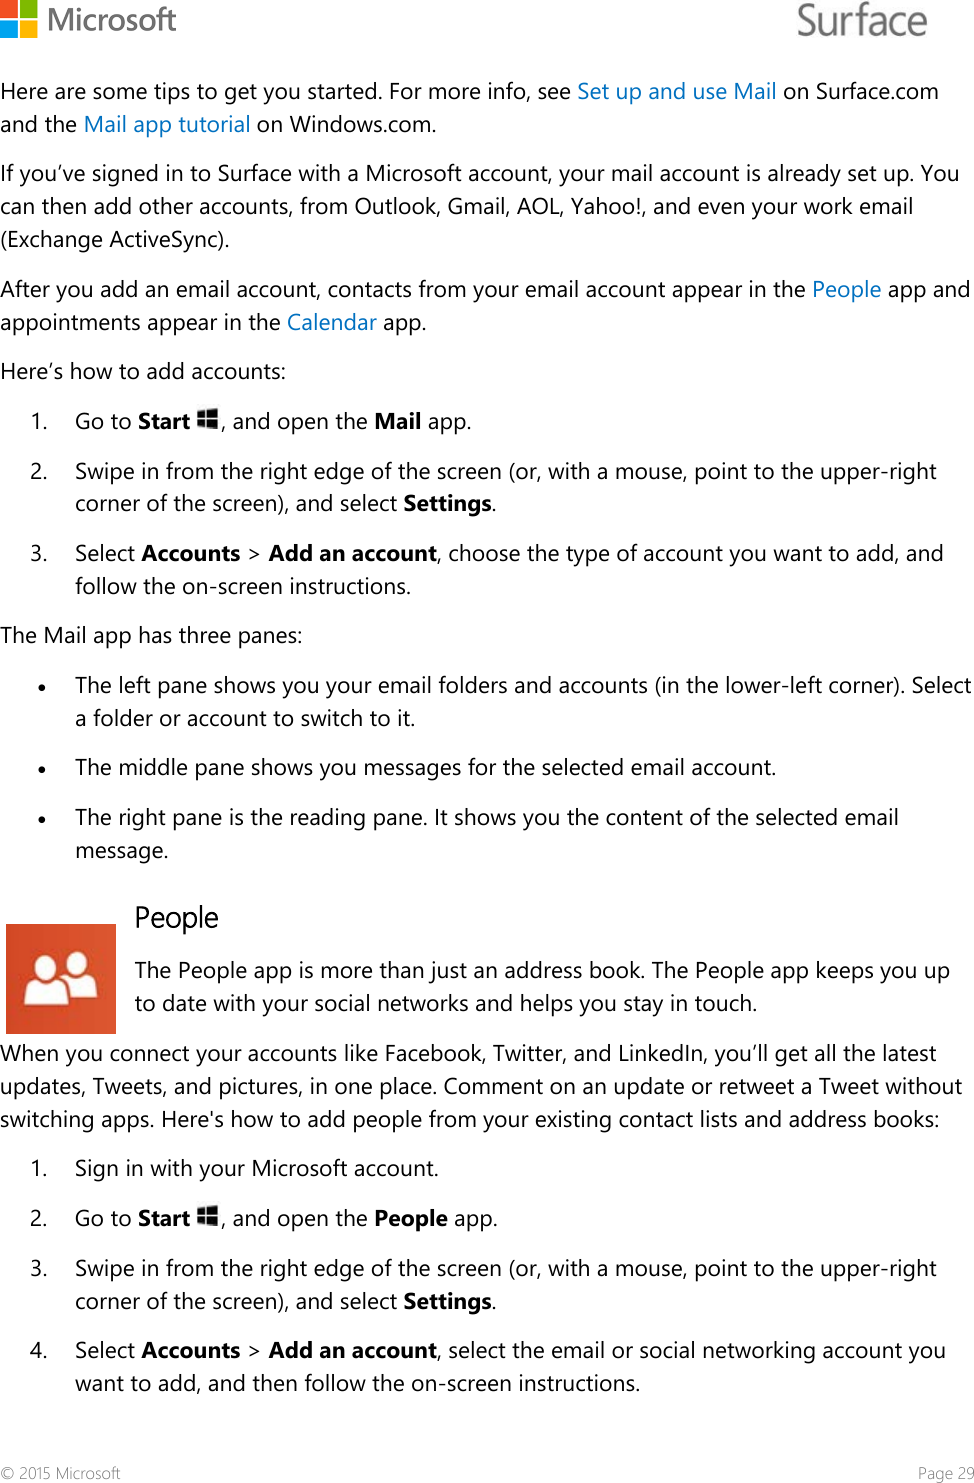    Here are some tips to get you started. For more info, see Set up and use Mail on Surface.com and the Mail app tutorial on Windows.com. If you’ve signed in to Surface with a Microsoft account, your mail account is already set up. You can then add other accounts, from Outlook, Gmail, AOL, Yahoo!, and even your work email (Exchange ActiveSync).  After you add an email account, contacts from your email account appear in the People app and appointments appear in the Calendar app. Here’s how to add accounts:  1. Go to Start , and open the Mail app.  2. Swipe in from the right edge of the screen (or, with a mouse, point to the upper-right corner of the screen), and select Settings. 3. Select Accounts &gt; Add an account, choose the type of account you want to add, and follow the on-screen instructions.  The Mail app has three panes: • The left pane shows you your email folders and accounts (in the lower-left corner). Select a folder or account to switch to it. • The middle pane shows you messages for the selected email account.  • The right pane is the reading pane. It shows you the content of the selected email message. People The People app is more than just an address book. The People app keeps you up to date with your social networks and helps you stay in touch.  When you connect your accounts like Facebook, Twitter, and LinkedIn, you’ll get all the latest updates, Tweets, and pictures, in one place. Comment on an update or retweet a Tweet without switching apps. Here&apos;s how to add people from your existing contact lists and address books:  1. Sign in with your Microsoft account.  2. Go to Start , and open the People app.  3. Swipe in from the right edge of the screen (or, with a mouse, point to the upper-right corner of the screen), and select Settings. 4. Select Accounts &gt; Add an account, select the email or social networking account you want to add, and then follow the on-screen instructions.  © 2015 Microsoft    Page 29 